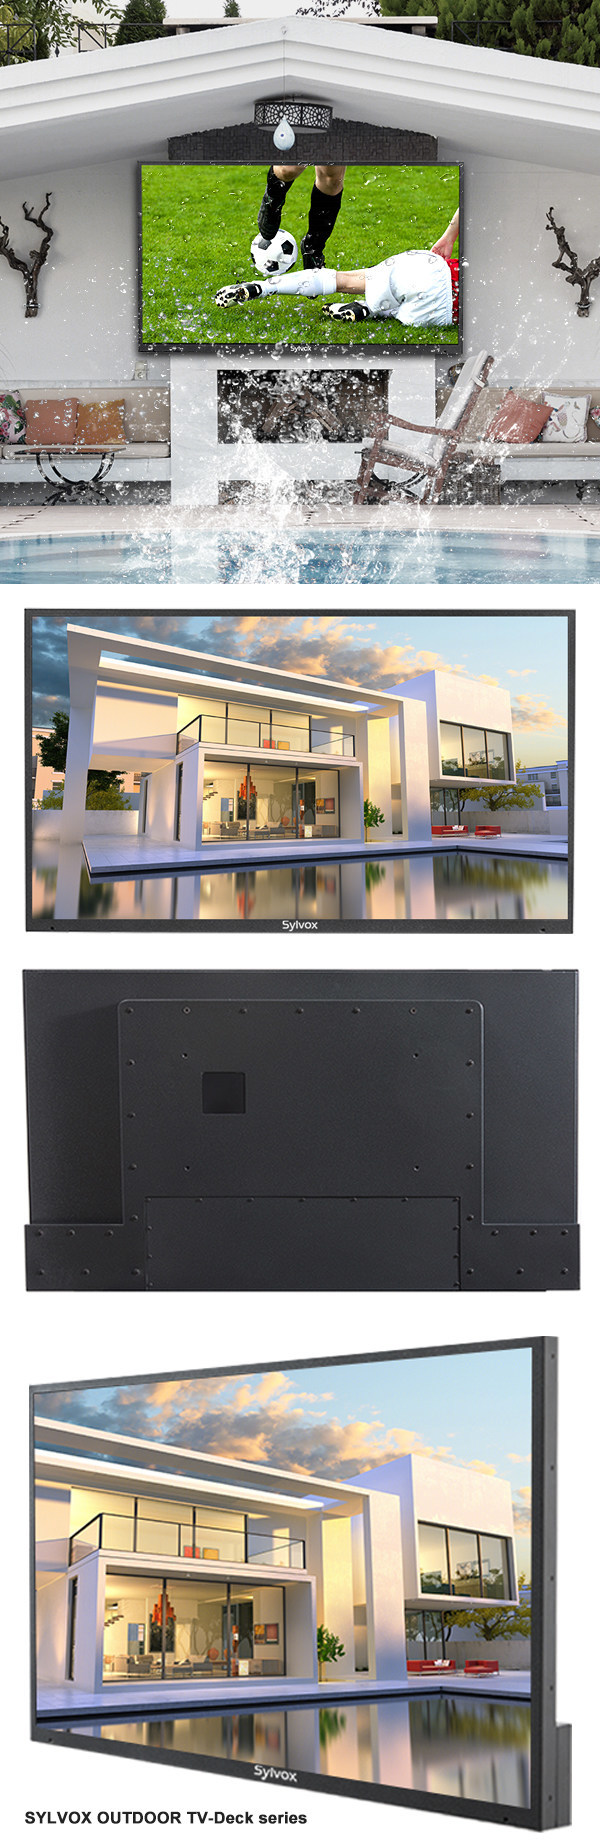 Sylvox 3rd Generation Outdoor TVs Released Globally with More Comprehensive Performance